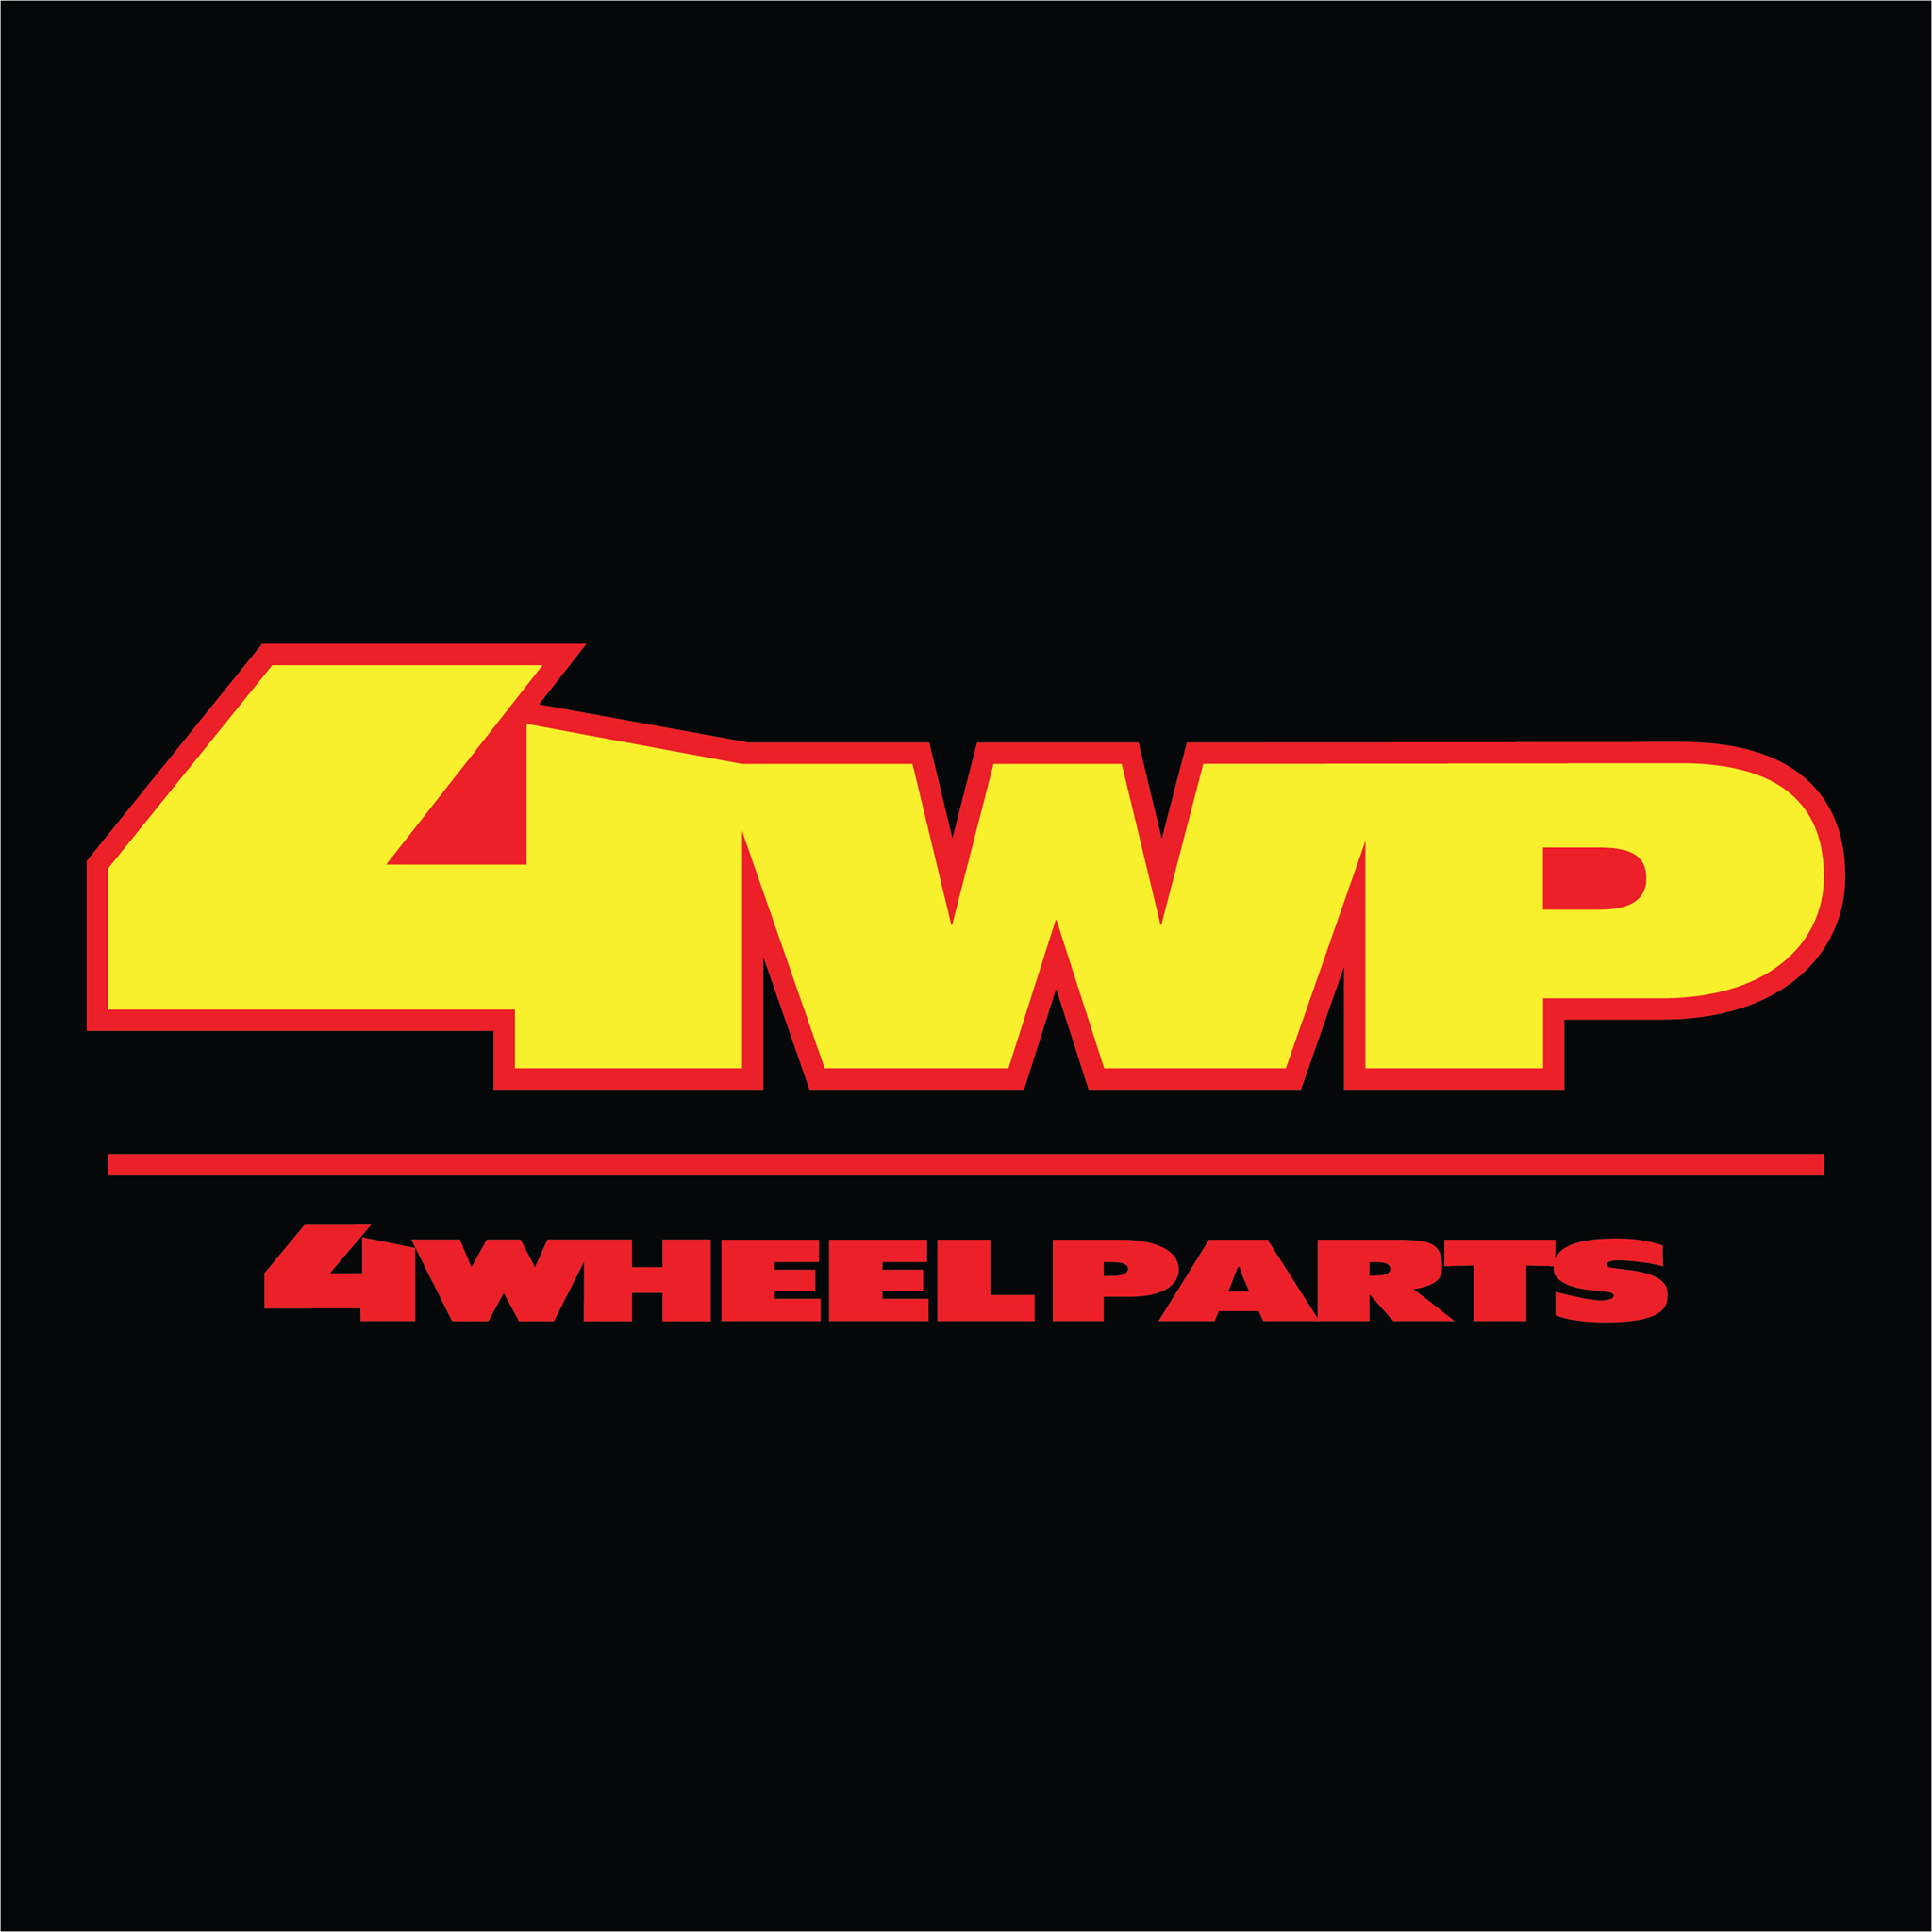 4 Wheel Parts Partners with California Off-Road Vehicle Association | THE SHOP